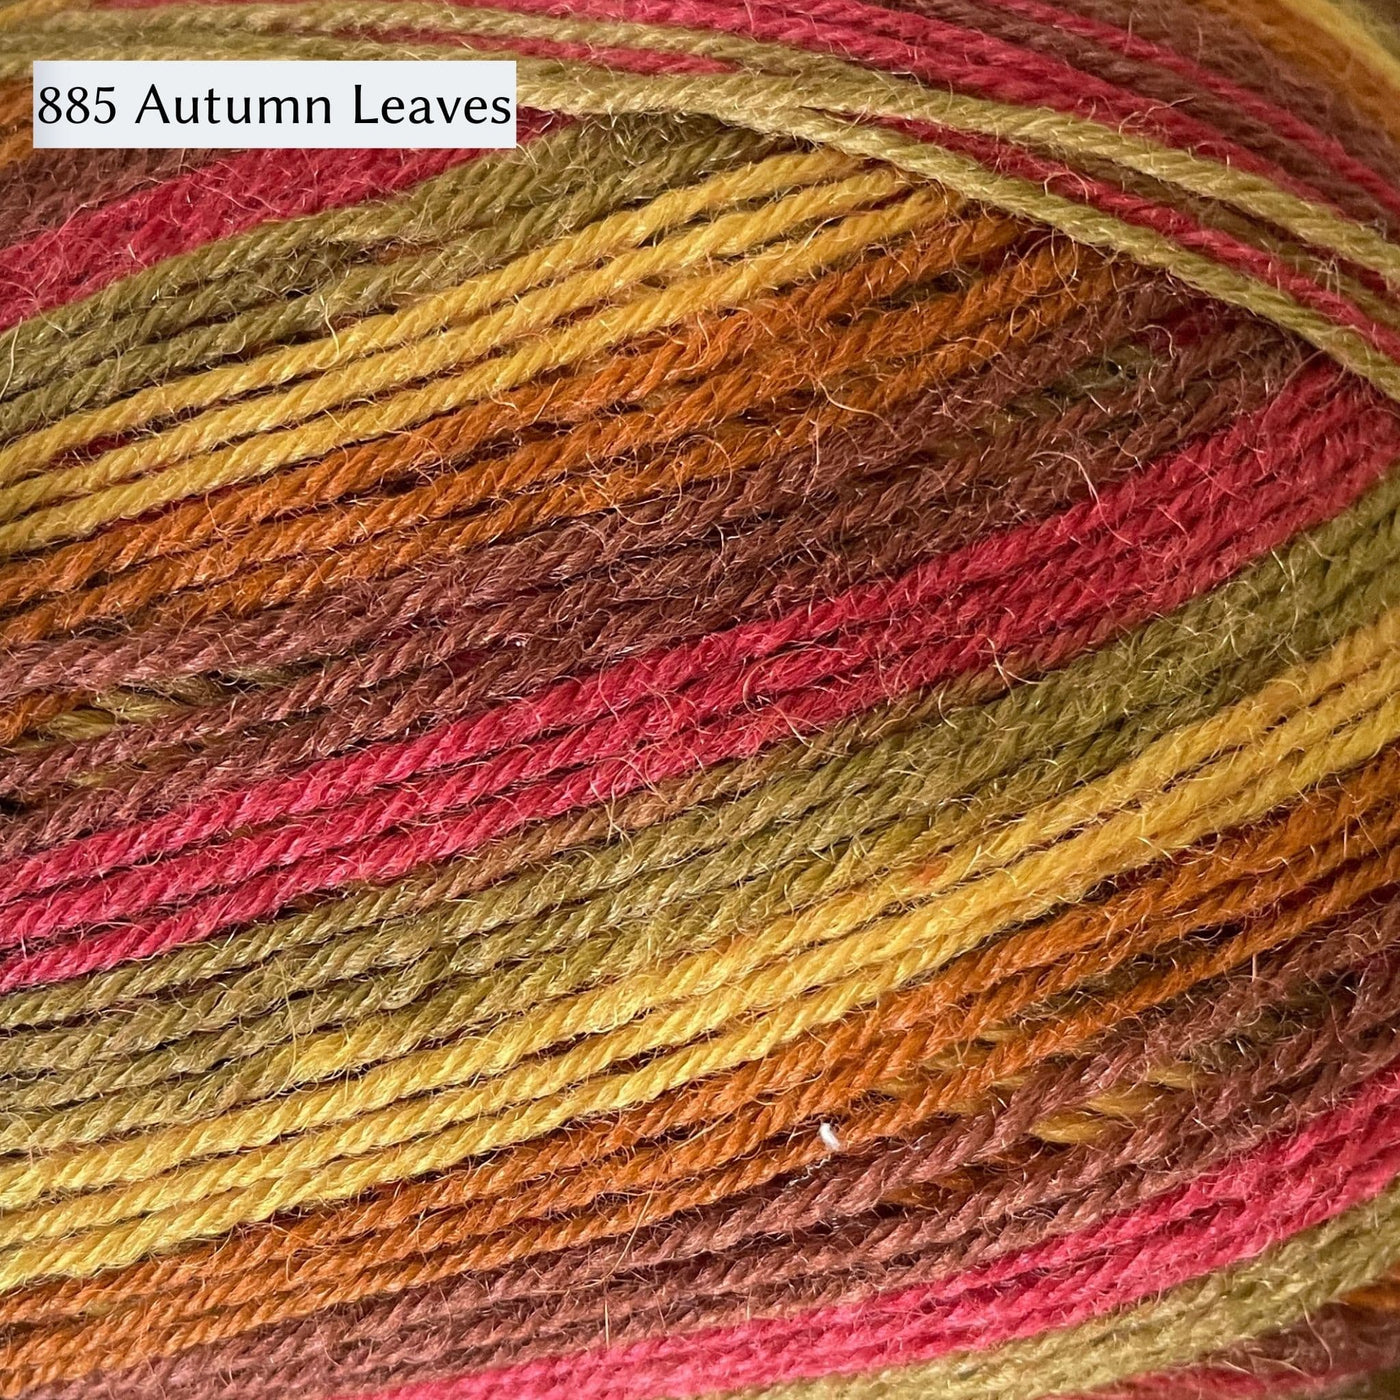 West Yorkshire Spinners Signature 4ply yarn, fingering weight, in color 885 Autumn Leaves, a striping colorway in autumnal colors including mustard, olive, copper, burgundy, and raspberry